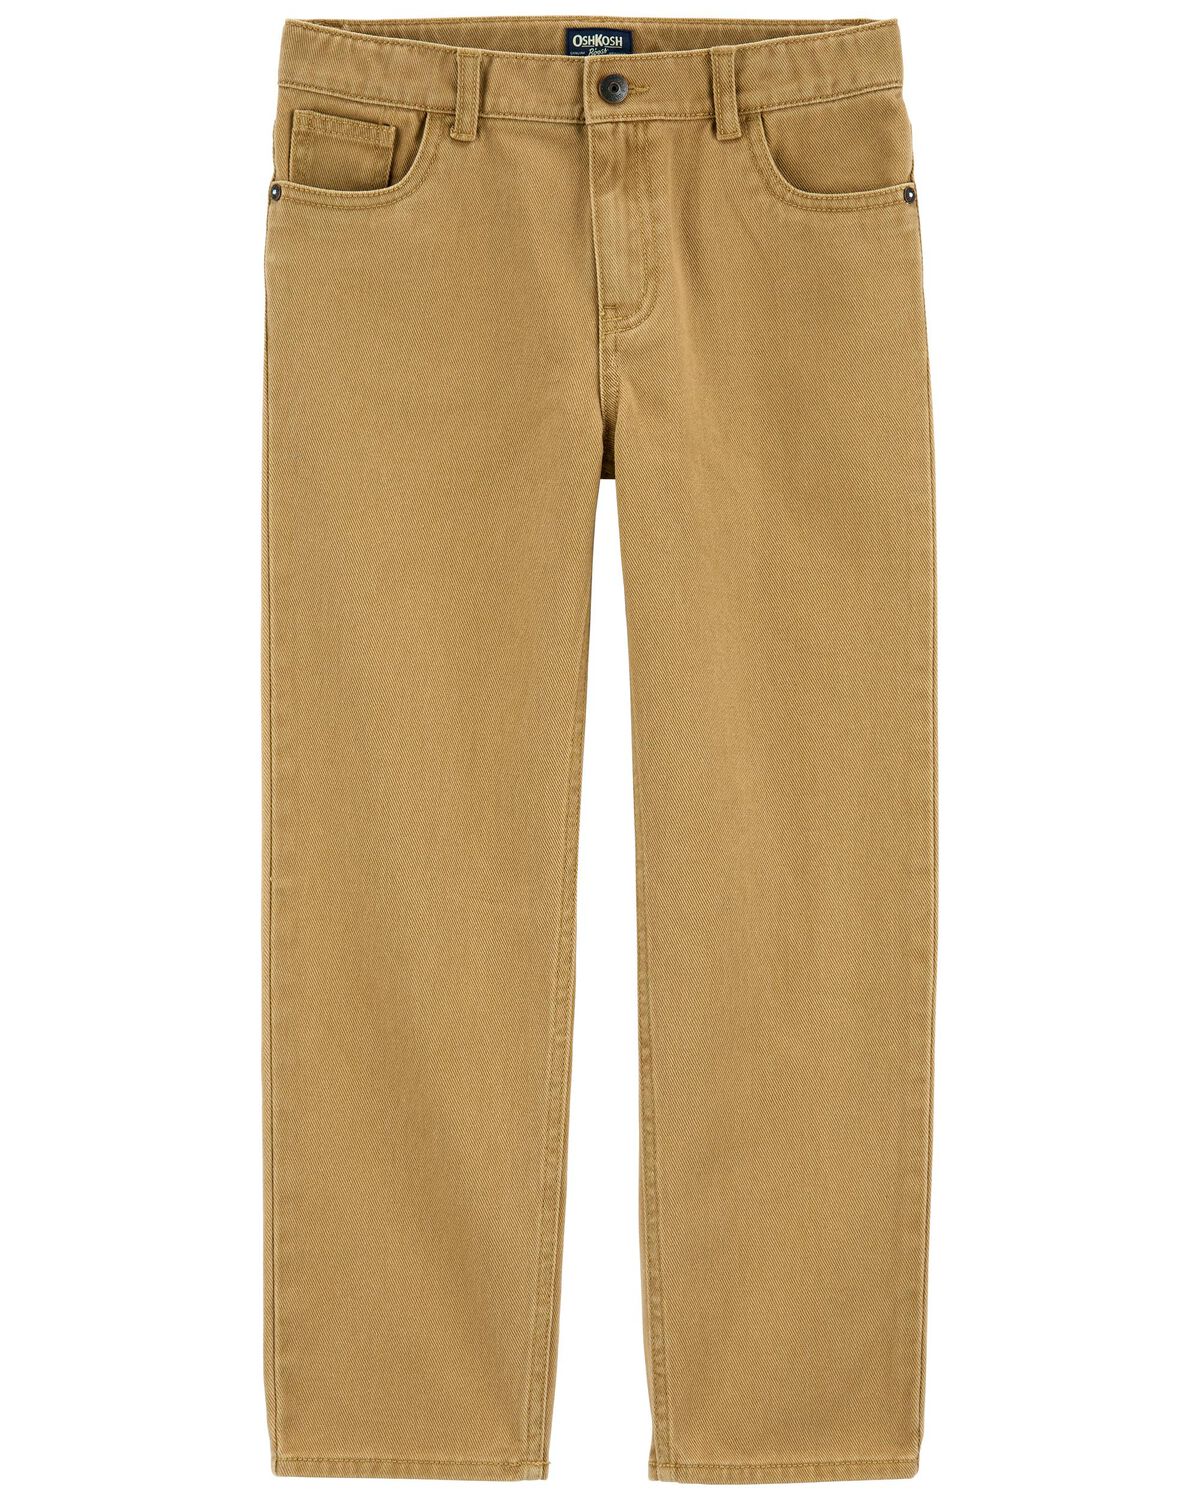 Kid Relaxed Fit Twill Pants